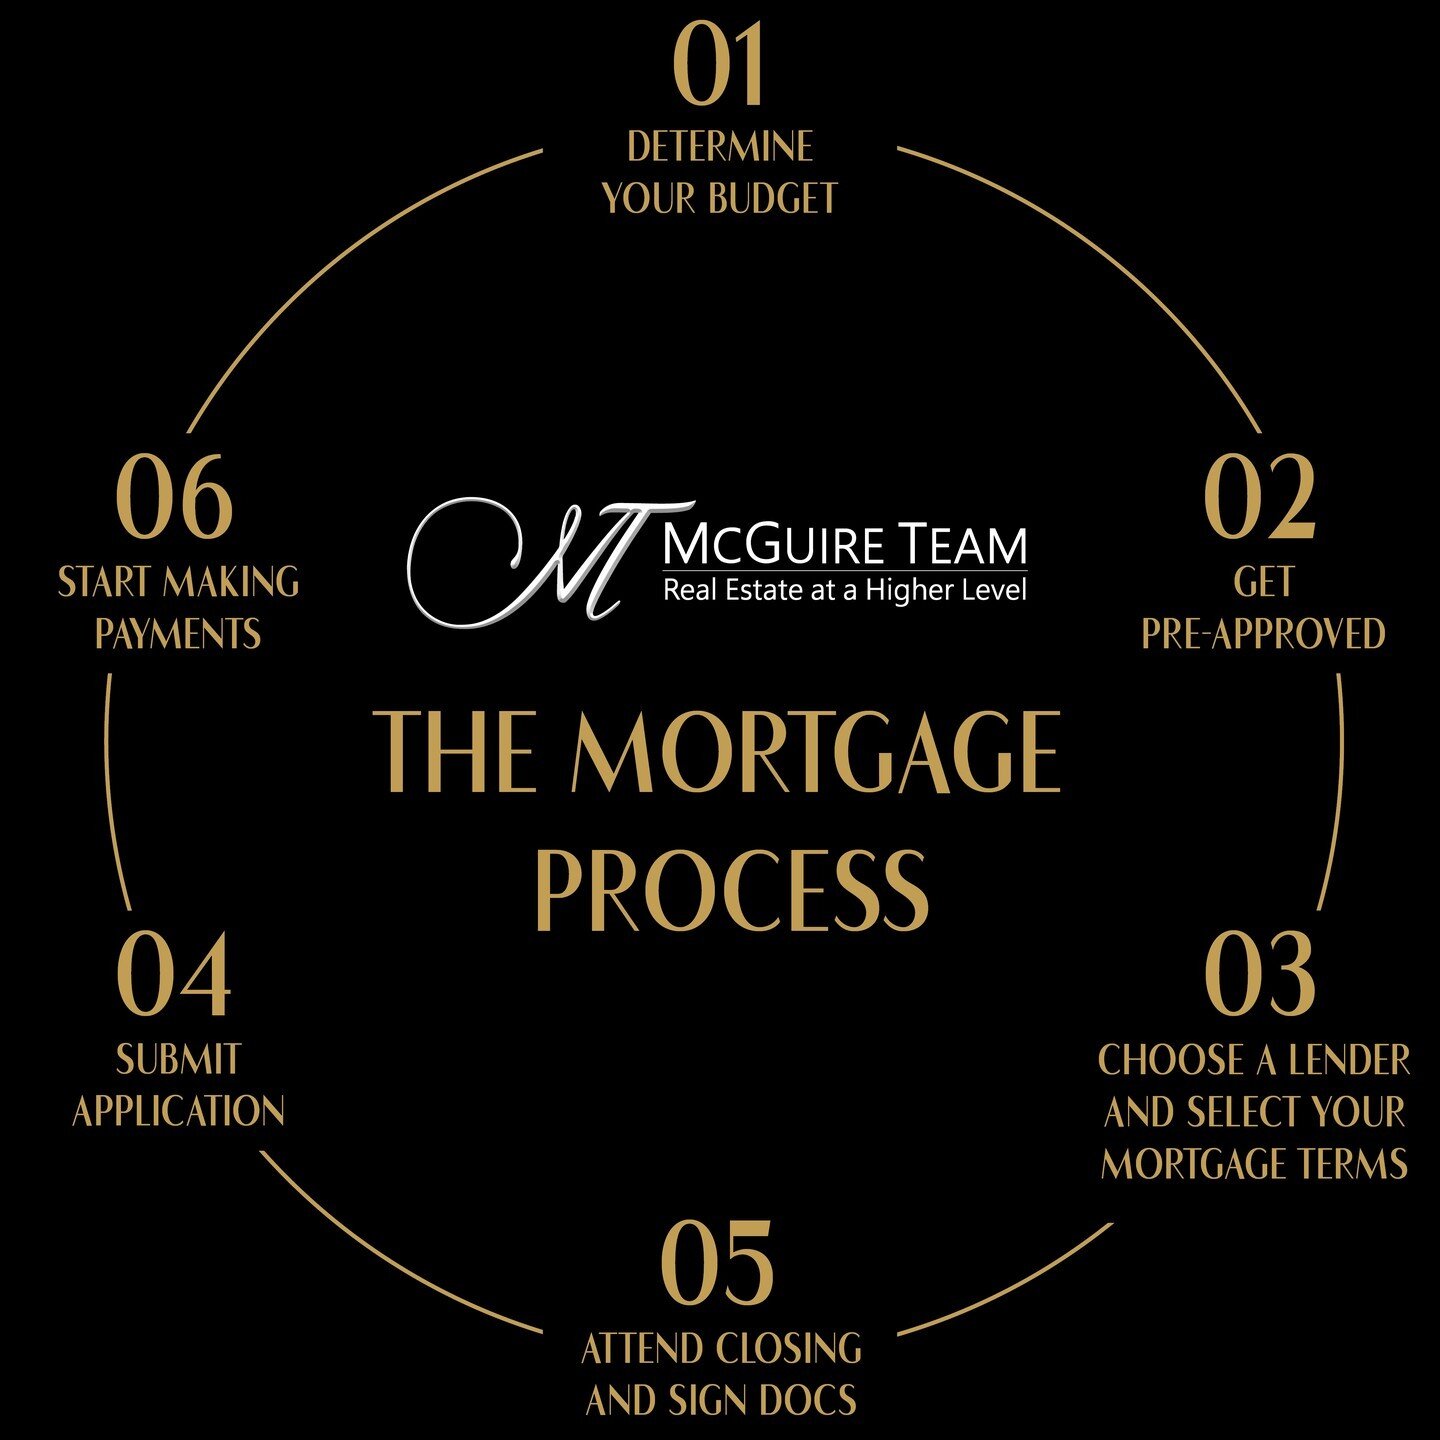 Feeling lost in the mortgage process? You&rsquo;re not alone.

Our clients often come to us feeling overwhelmed by the mortgage process. That&rsquo;s why we make sure to guide them through the process step by step, so they can feel confident and secu